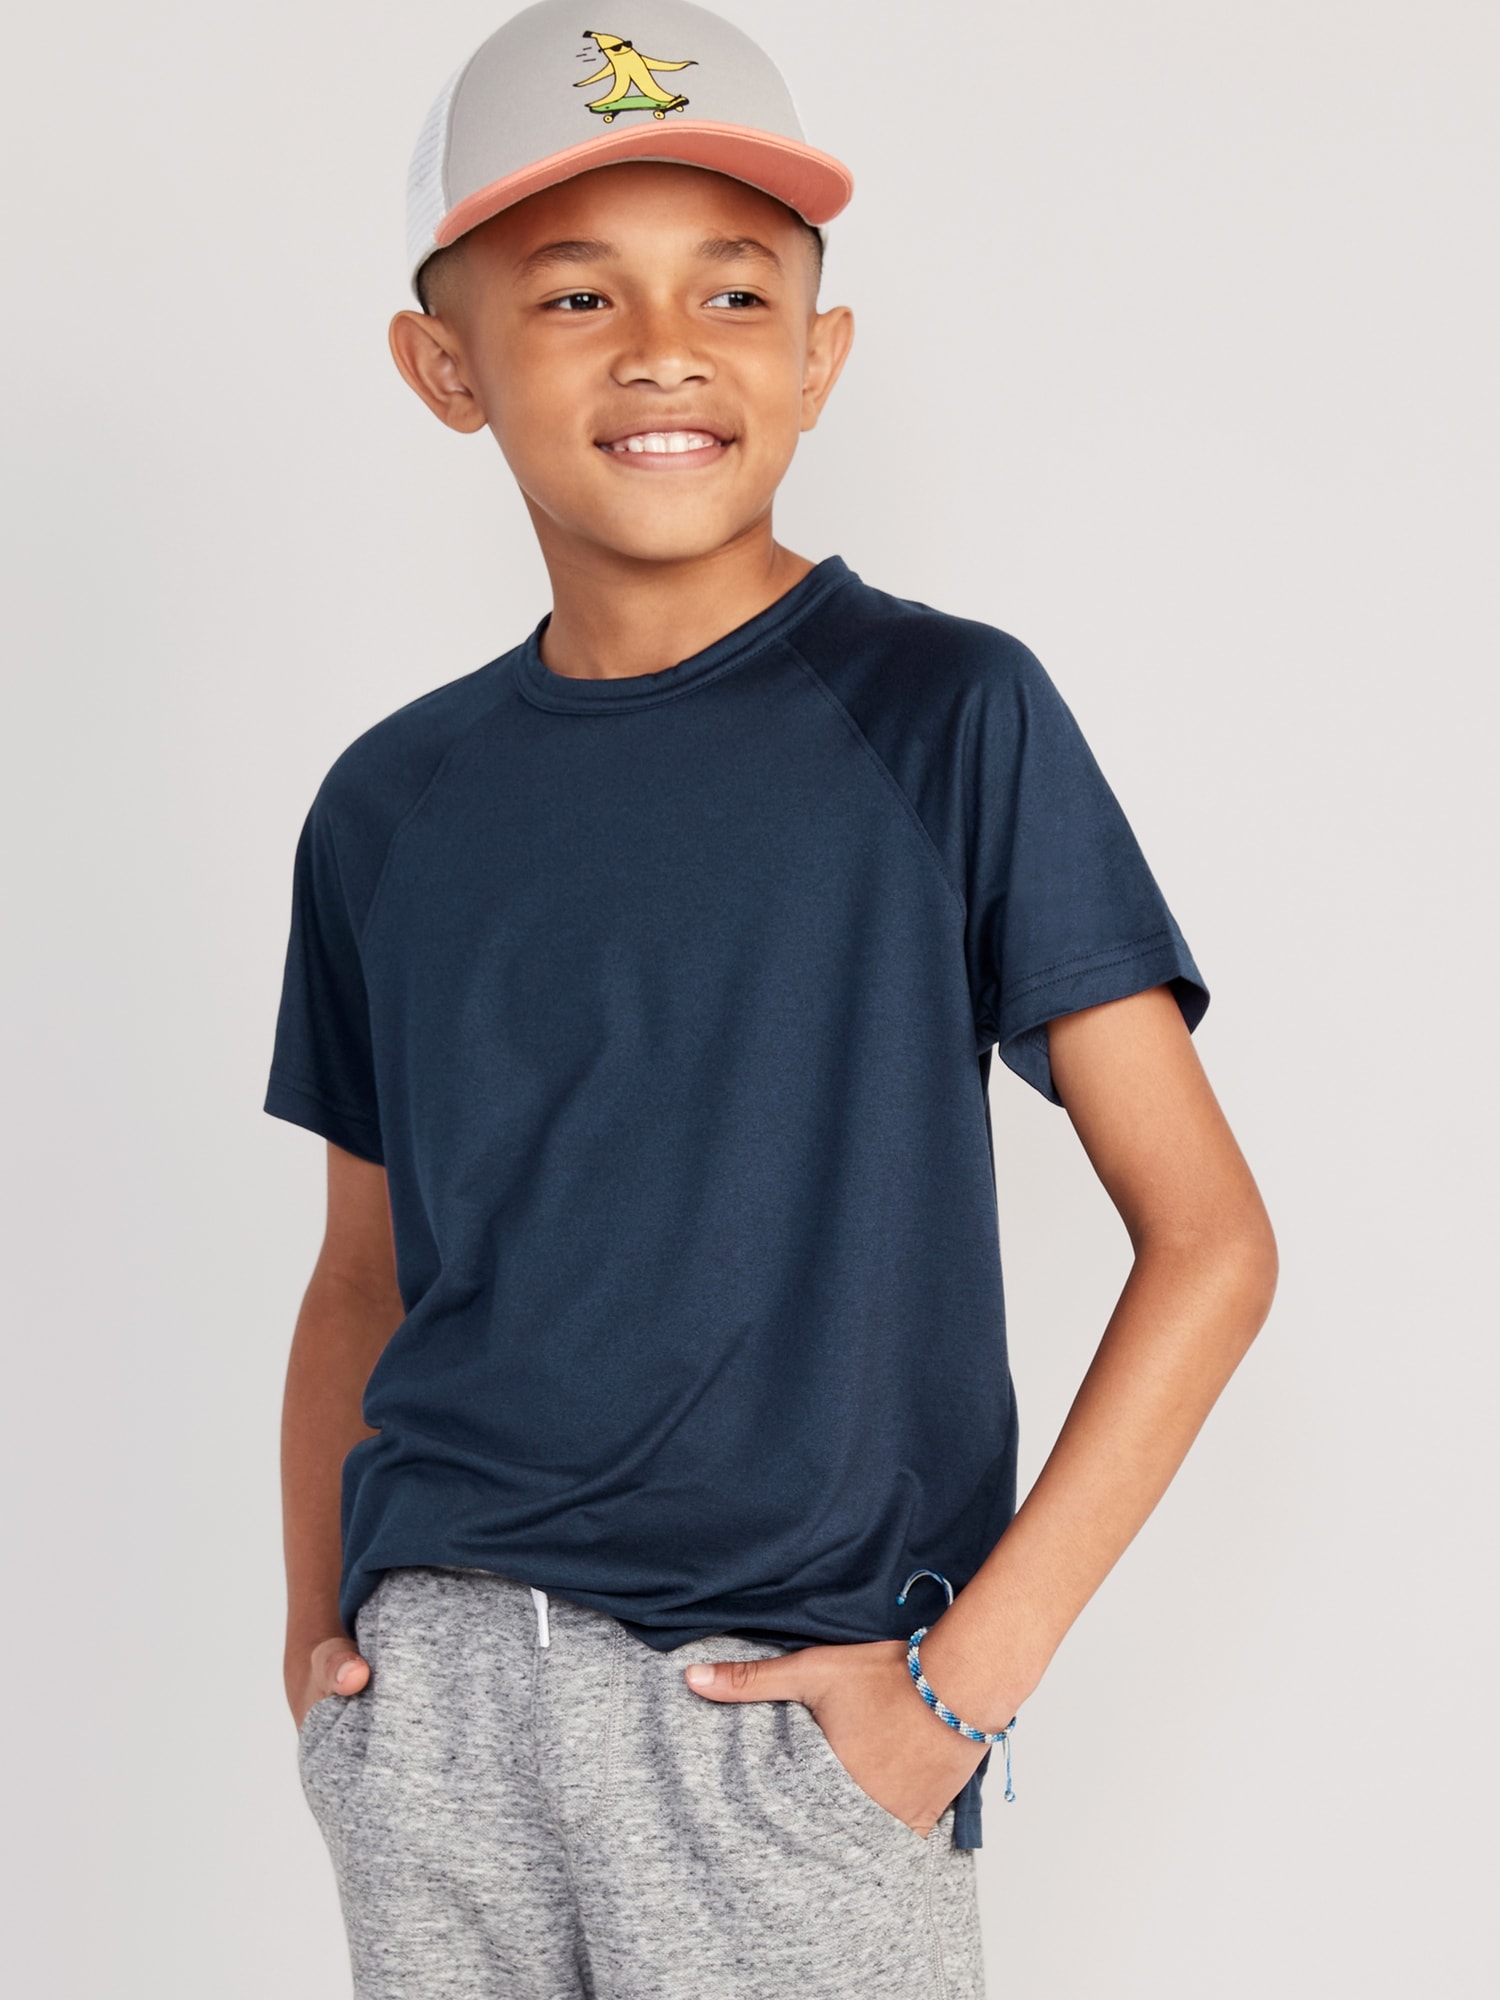 Old Navy Cloud 94 Soft Performance T-Shirt for Boys blue. 1